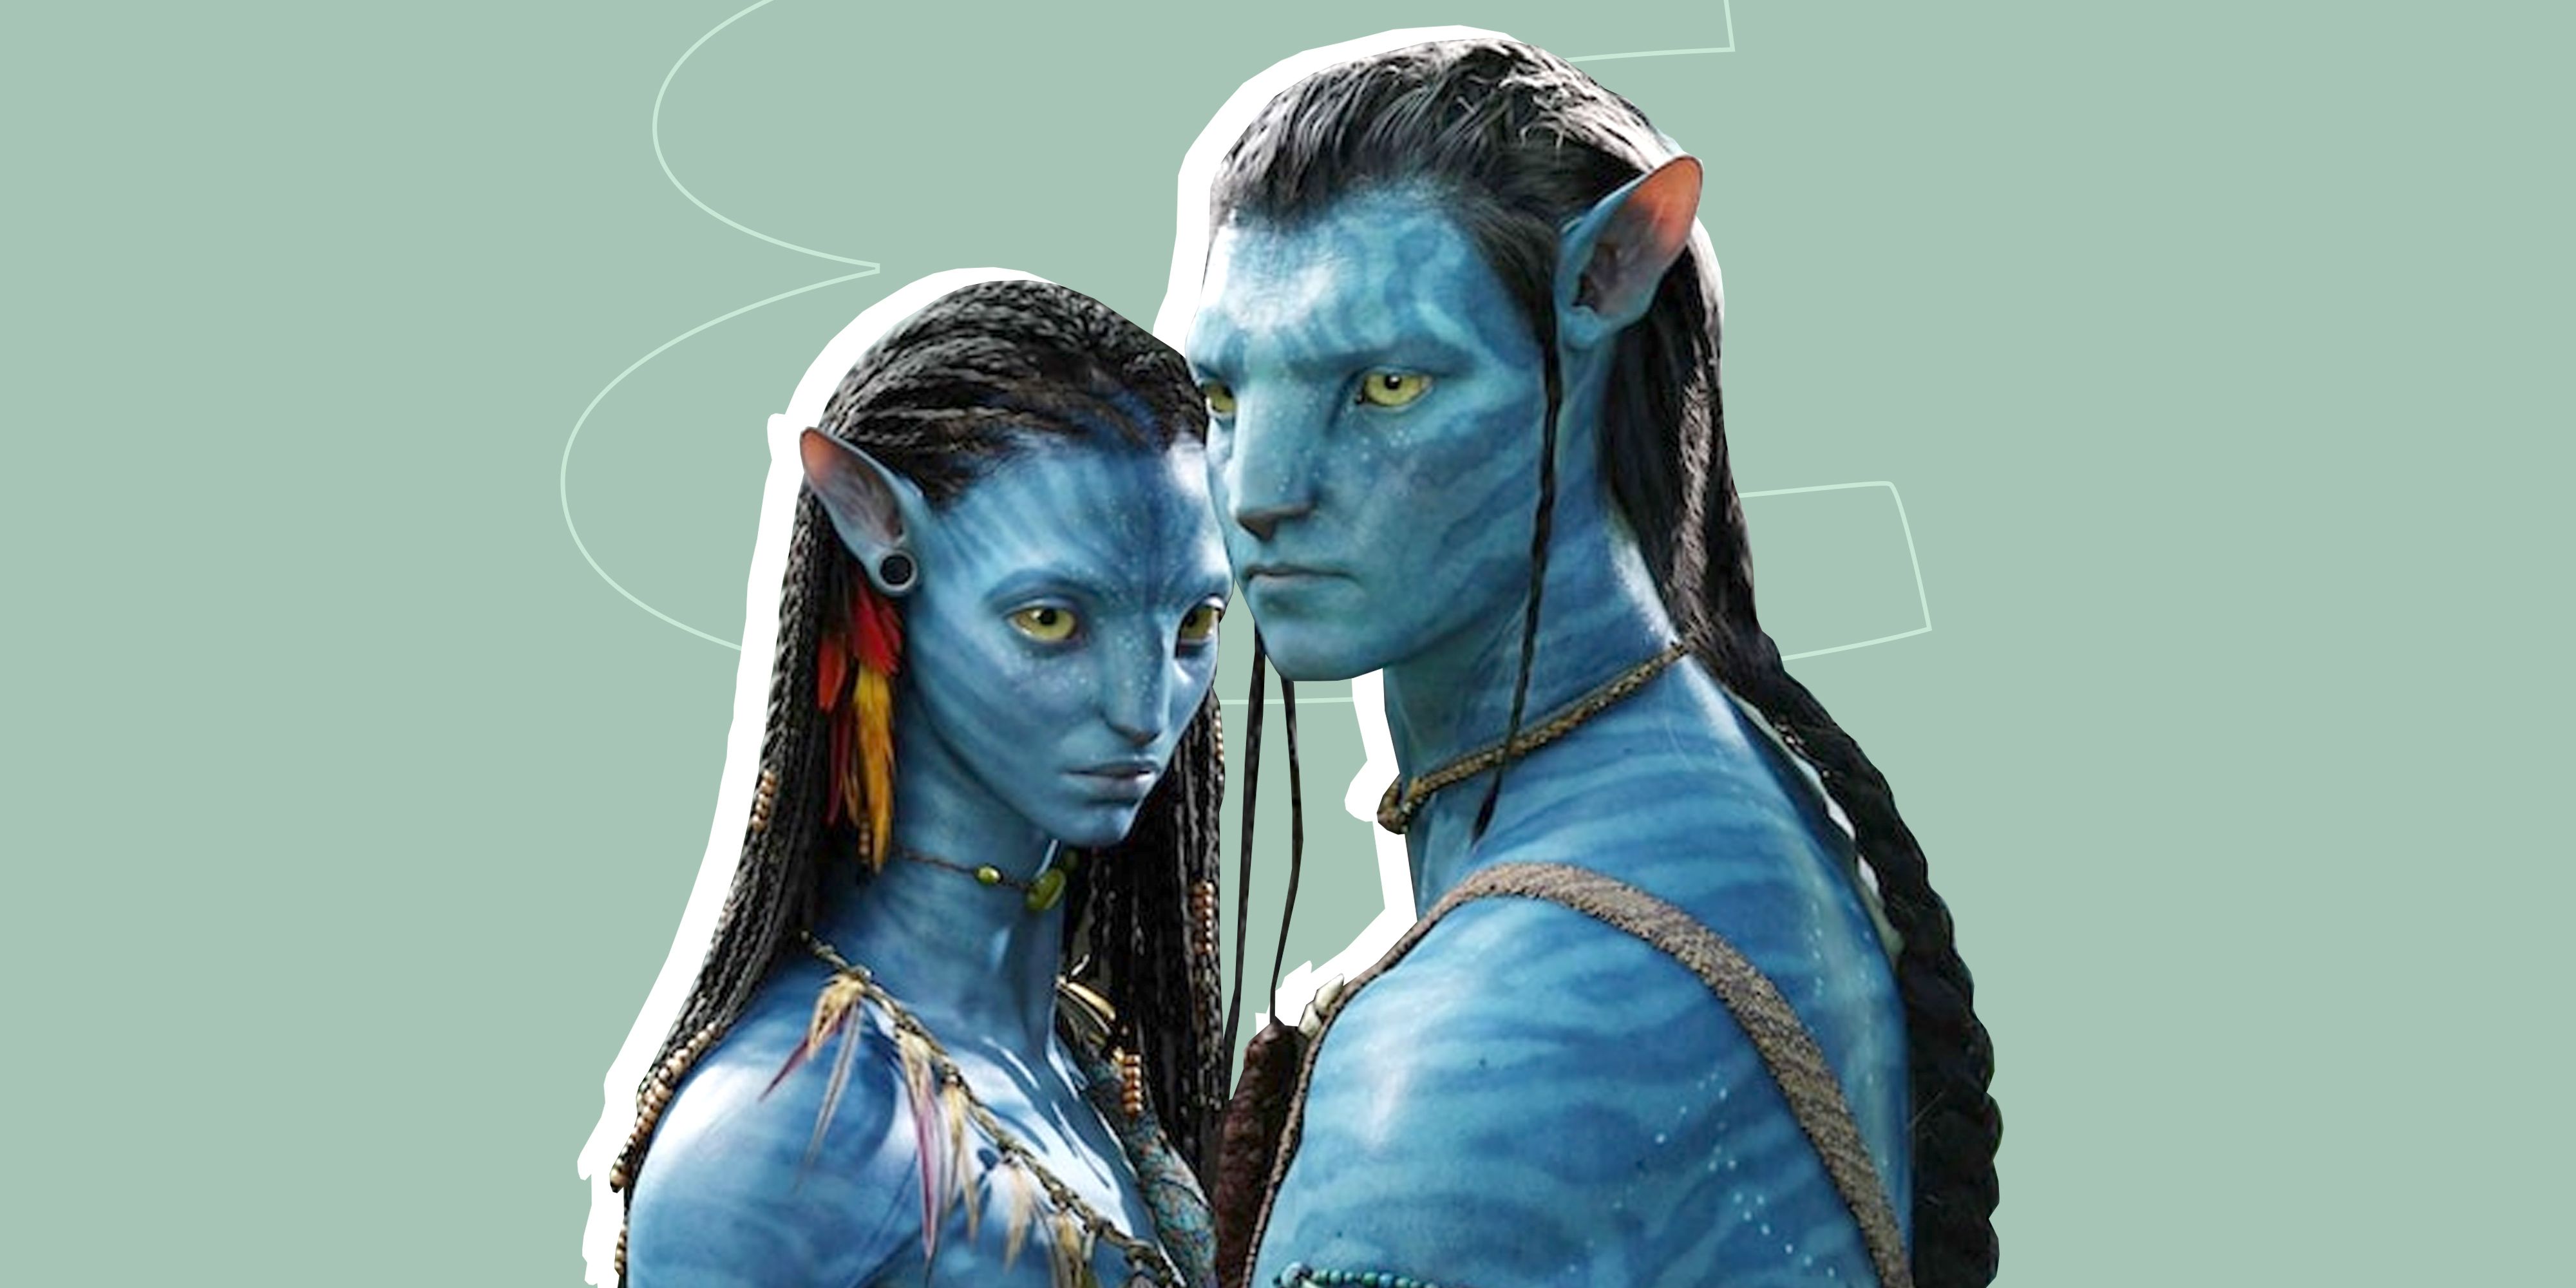 What new advance technology will we see in avatar 2 the last movies  technology in the lab was really interesting Aspecially the link room  r Avatar